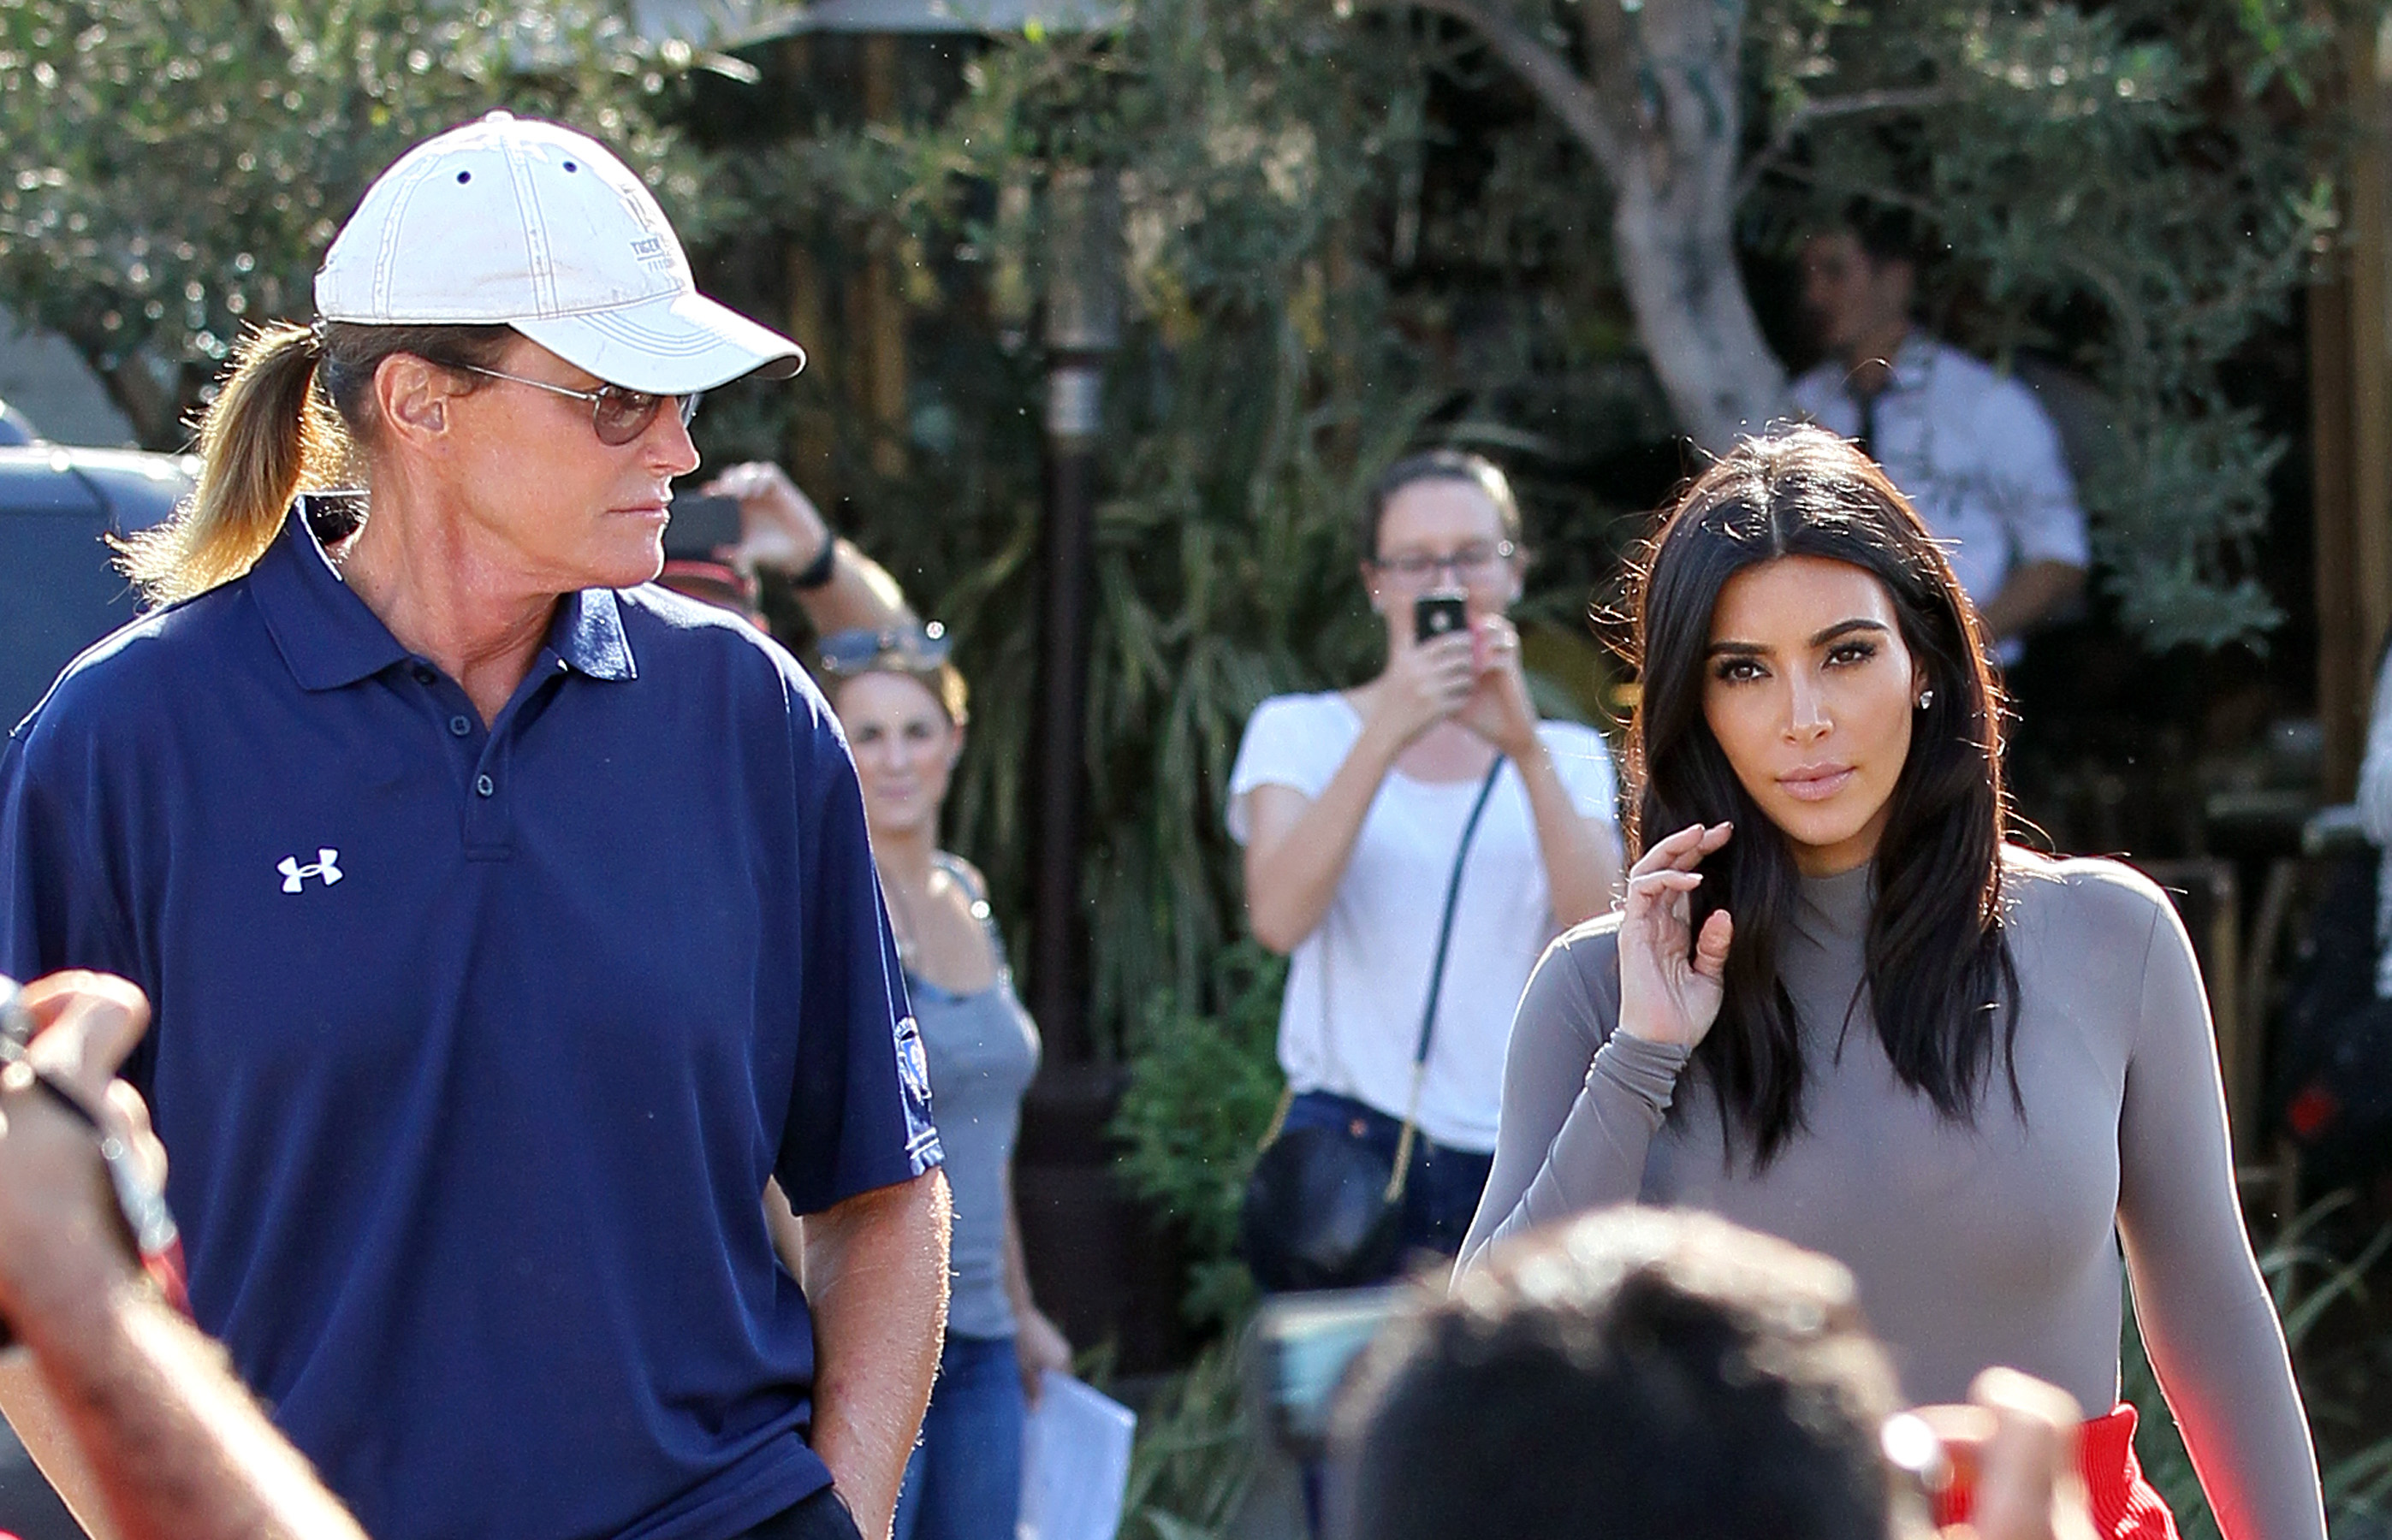 Bruce Jenner and Kim Kardashian are seen filming their reality show in Los Angeles on Oct. 20, 2014. (JB Lacroix—GC Images/Getty Images)